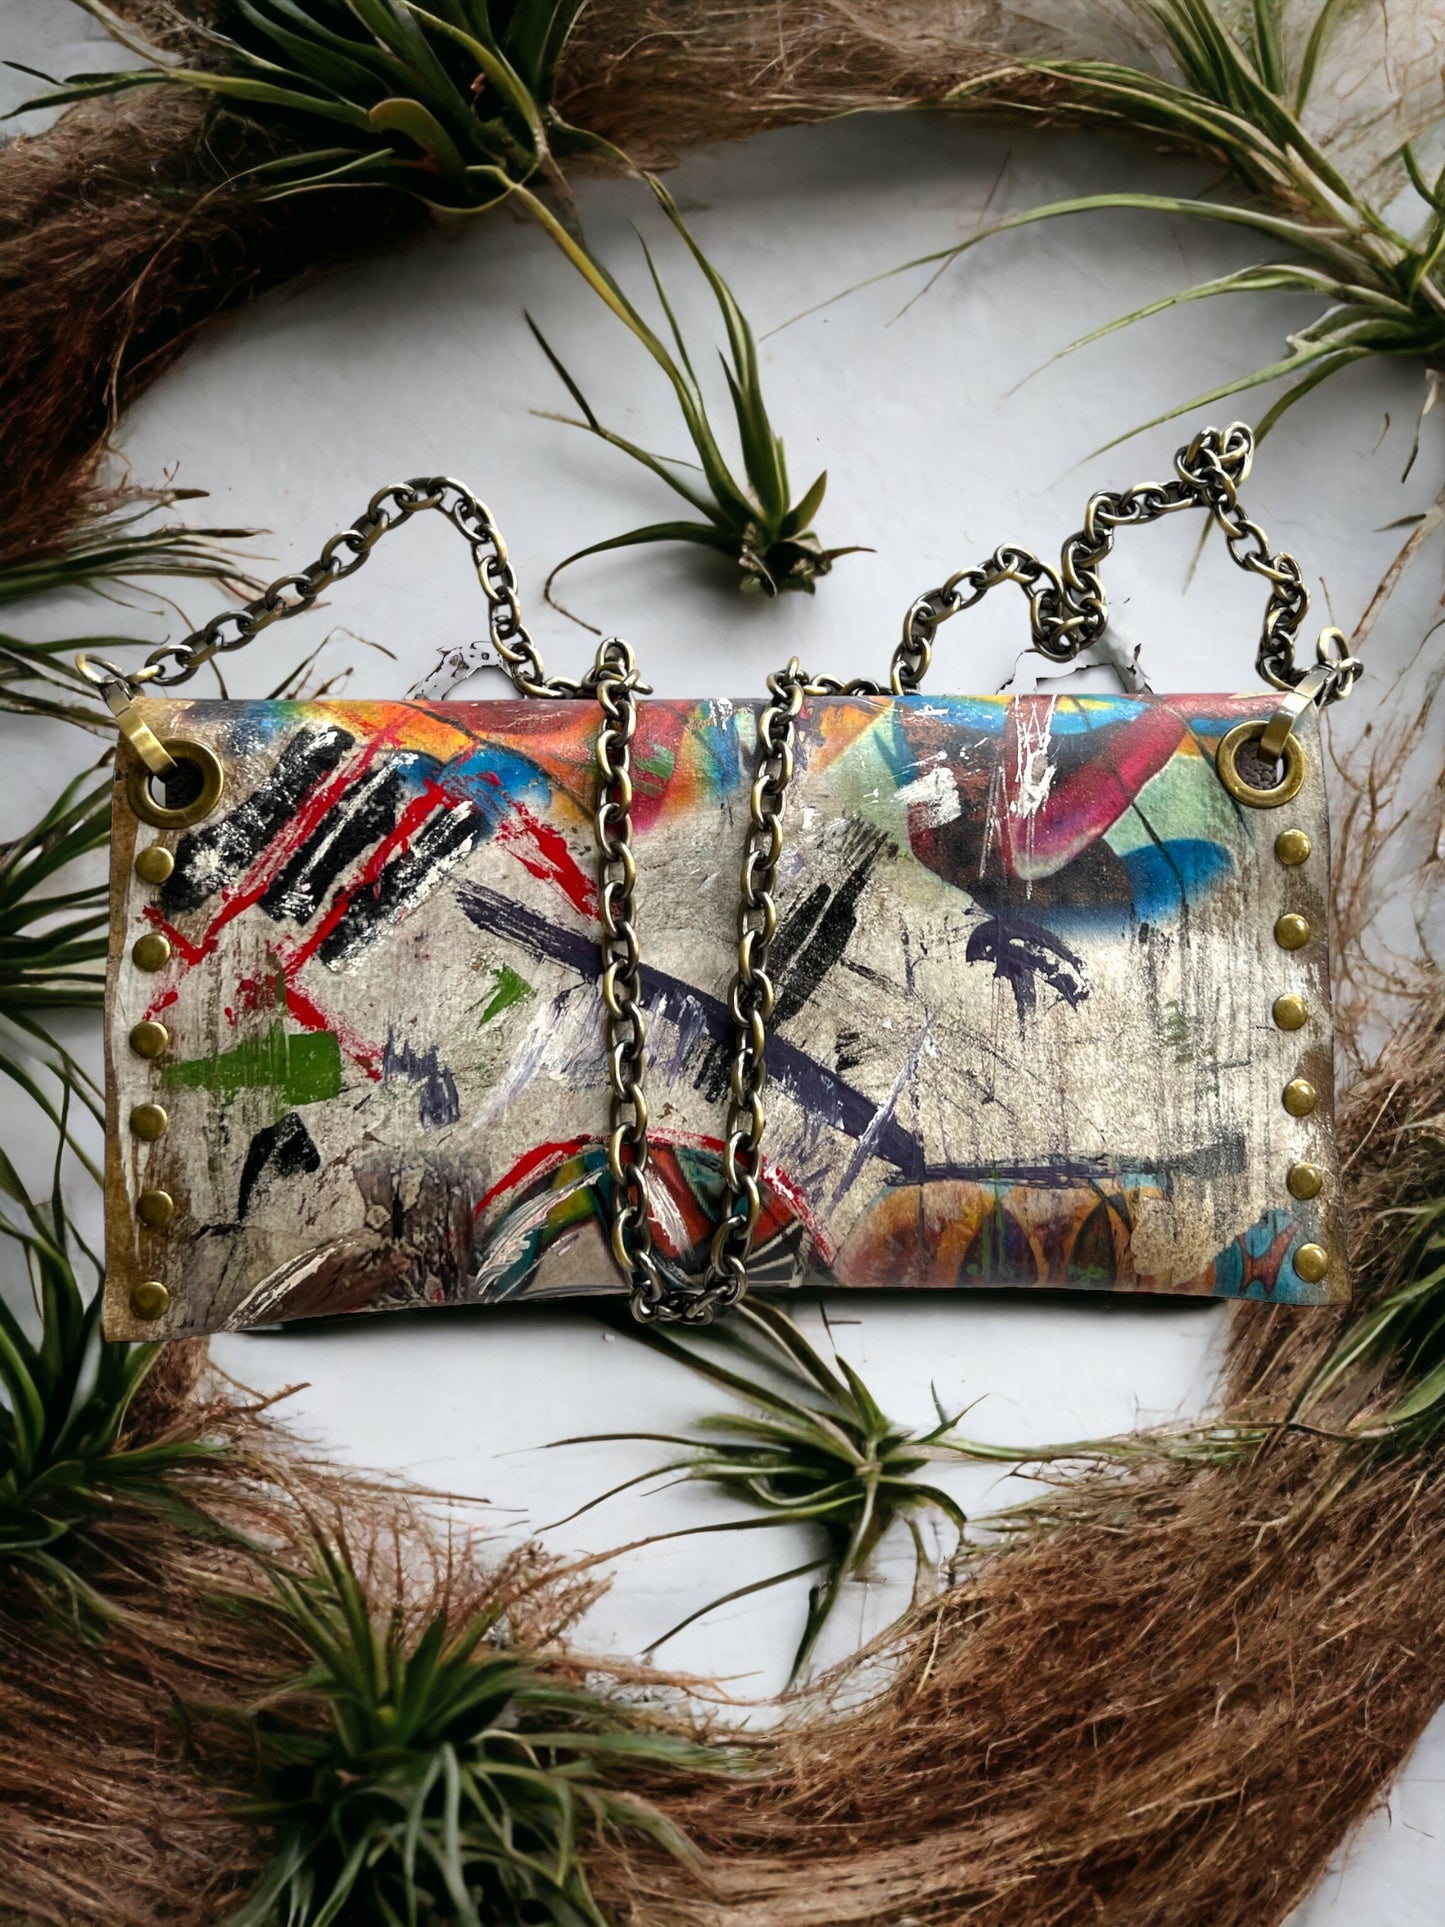 Abstract Leather Hand-Painted Clutch Bag